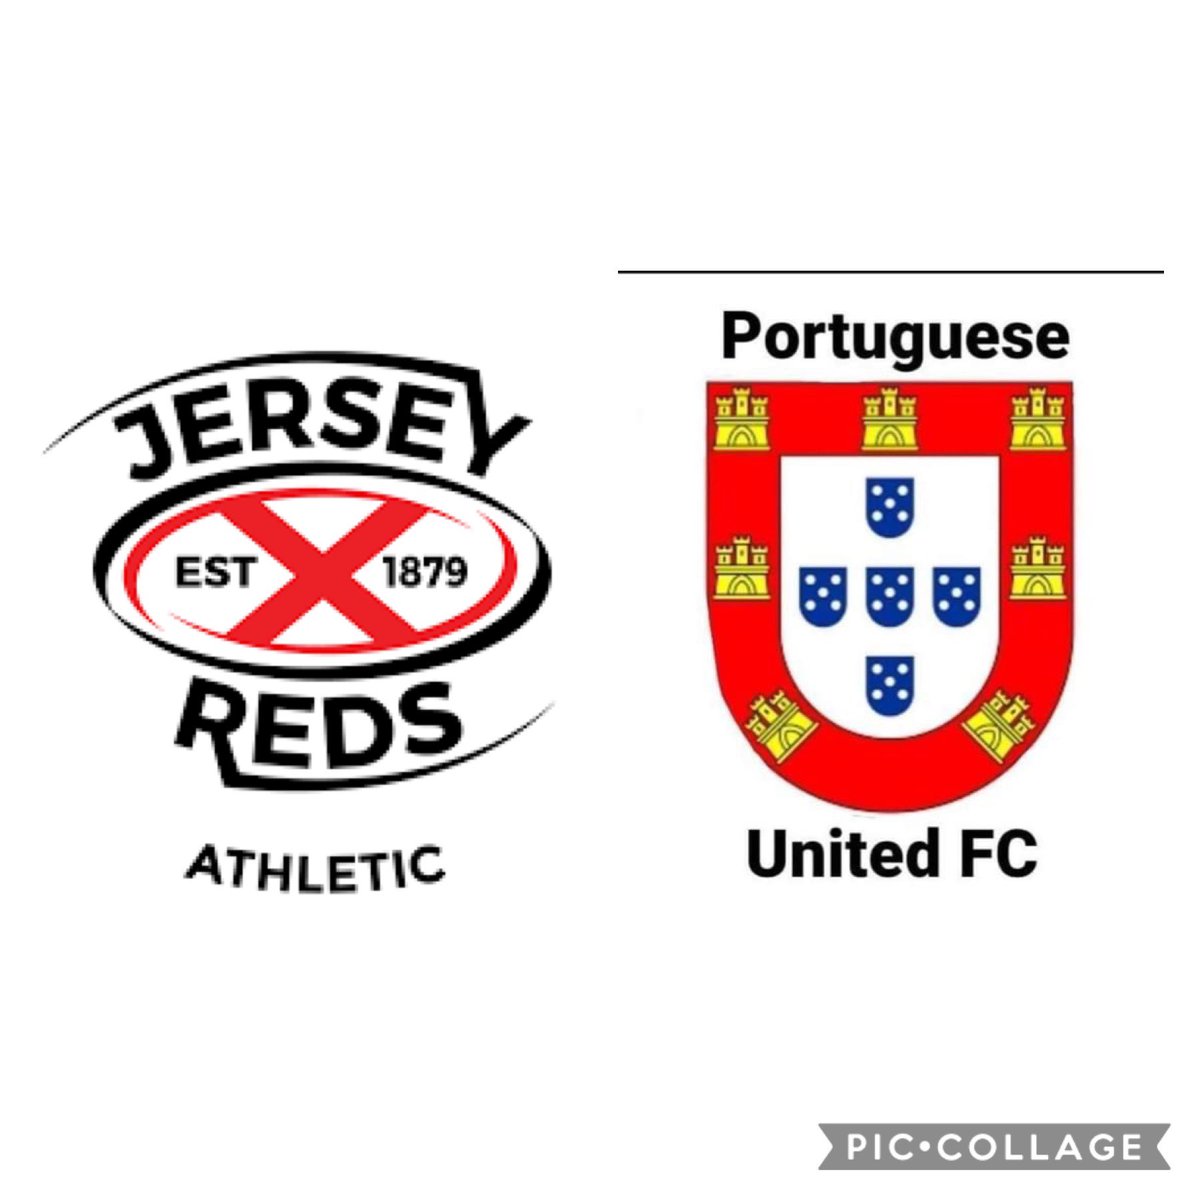 Jersey Reds Athletic (@JRFCAthletic 